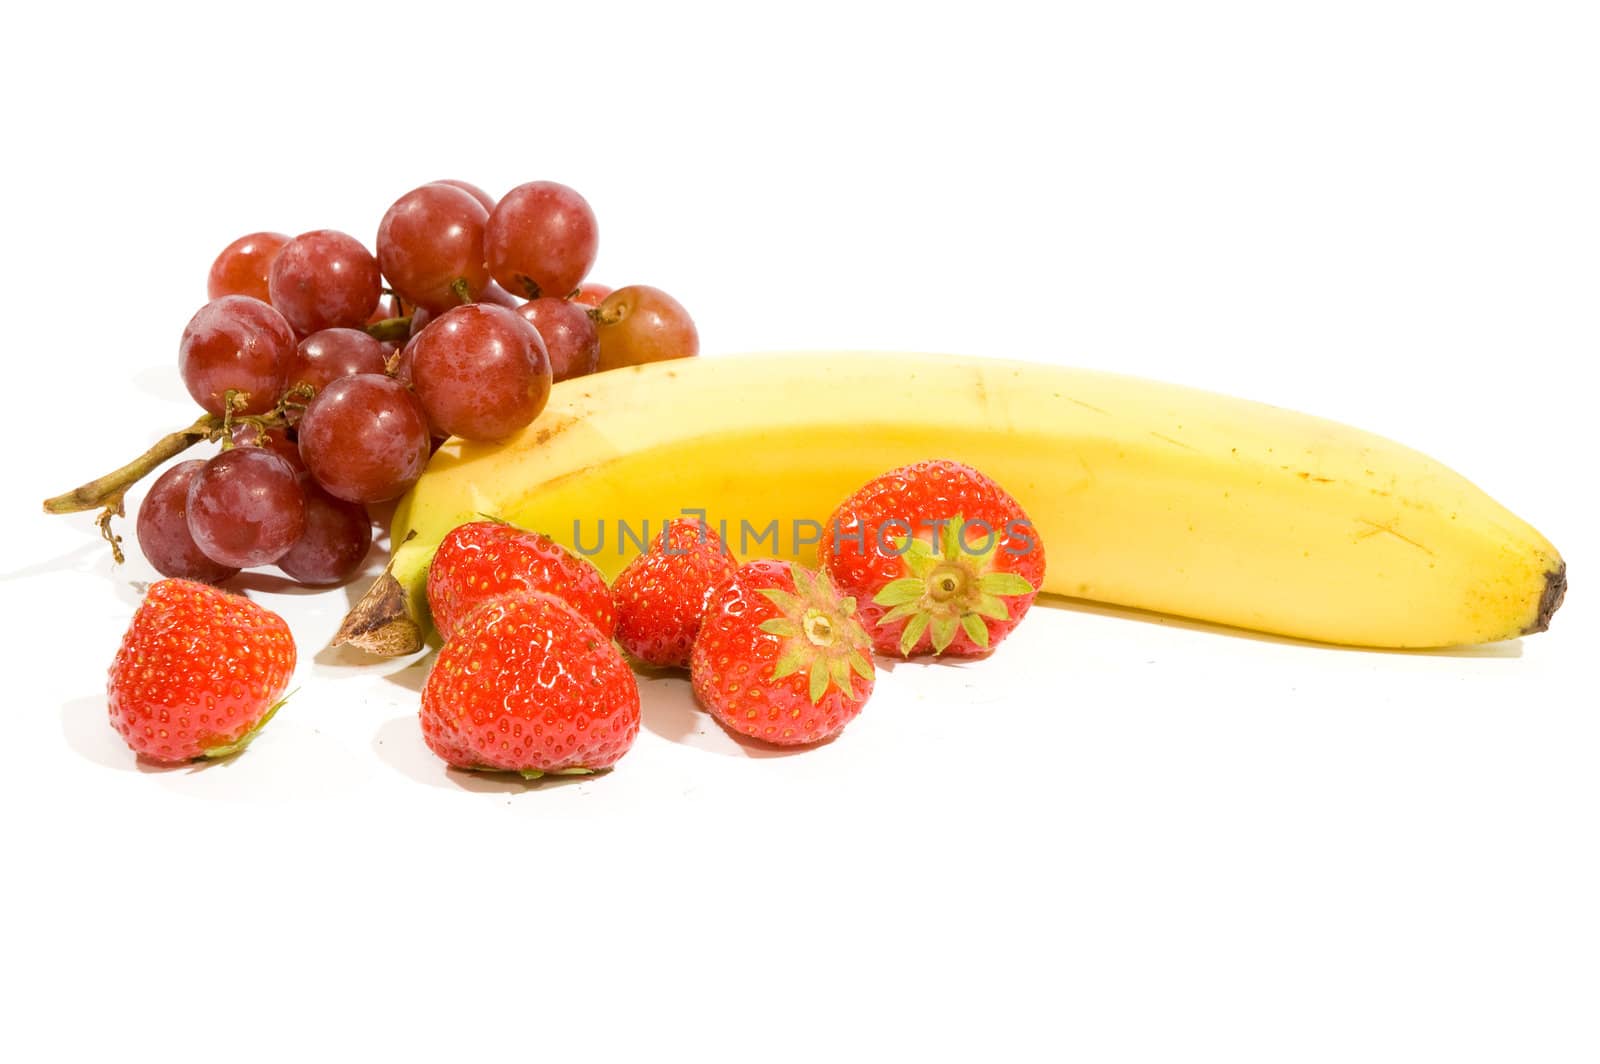 Multi fruits with cherrys  isolated on white